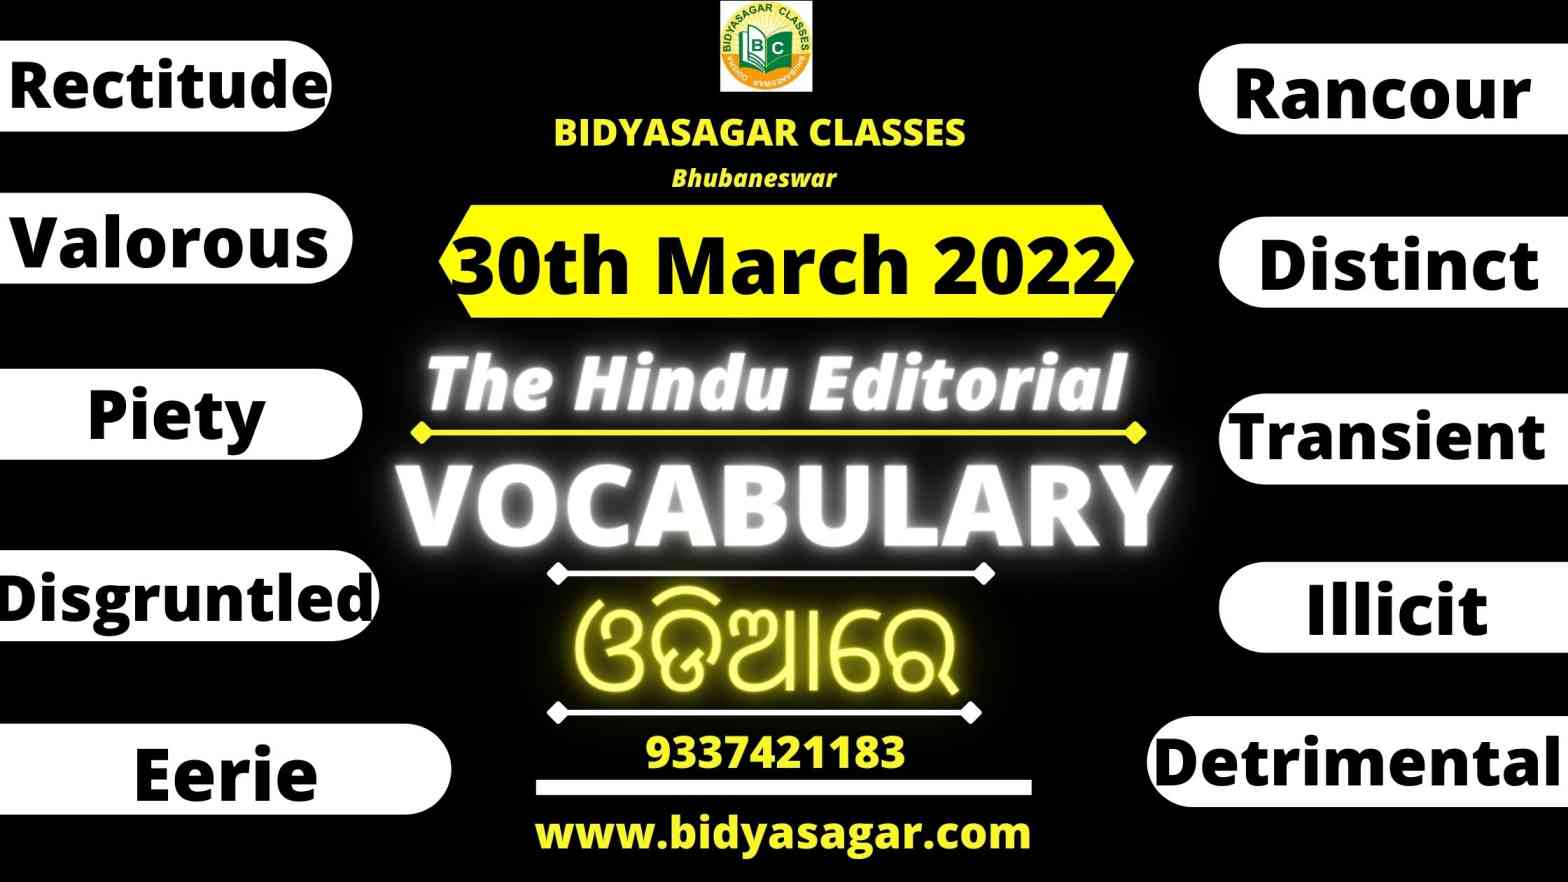 The Hindu Editorial Vocabulary of 30th March 2022